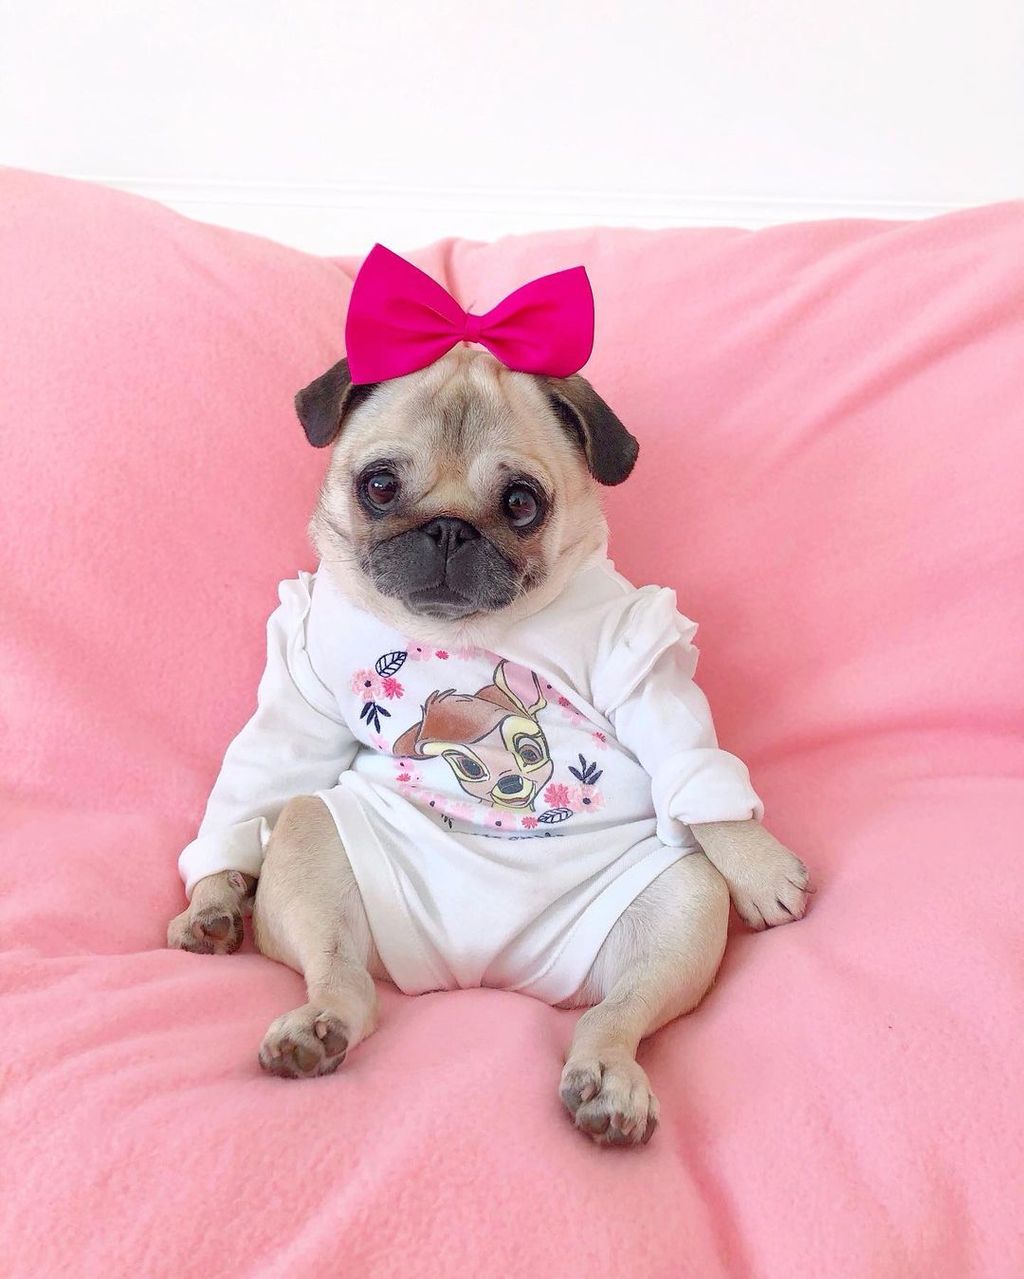 Forrás: Instagram/Loulou the Pug